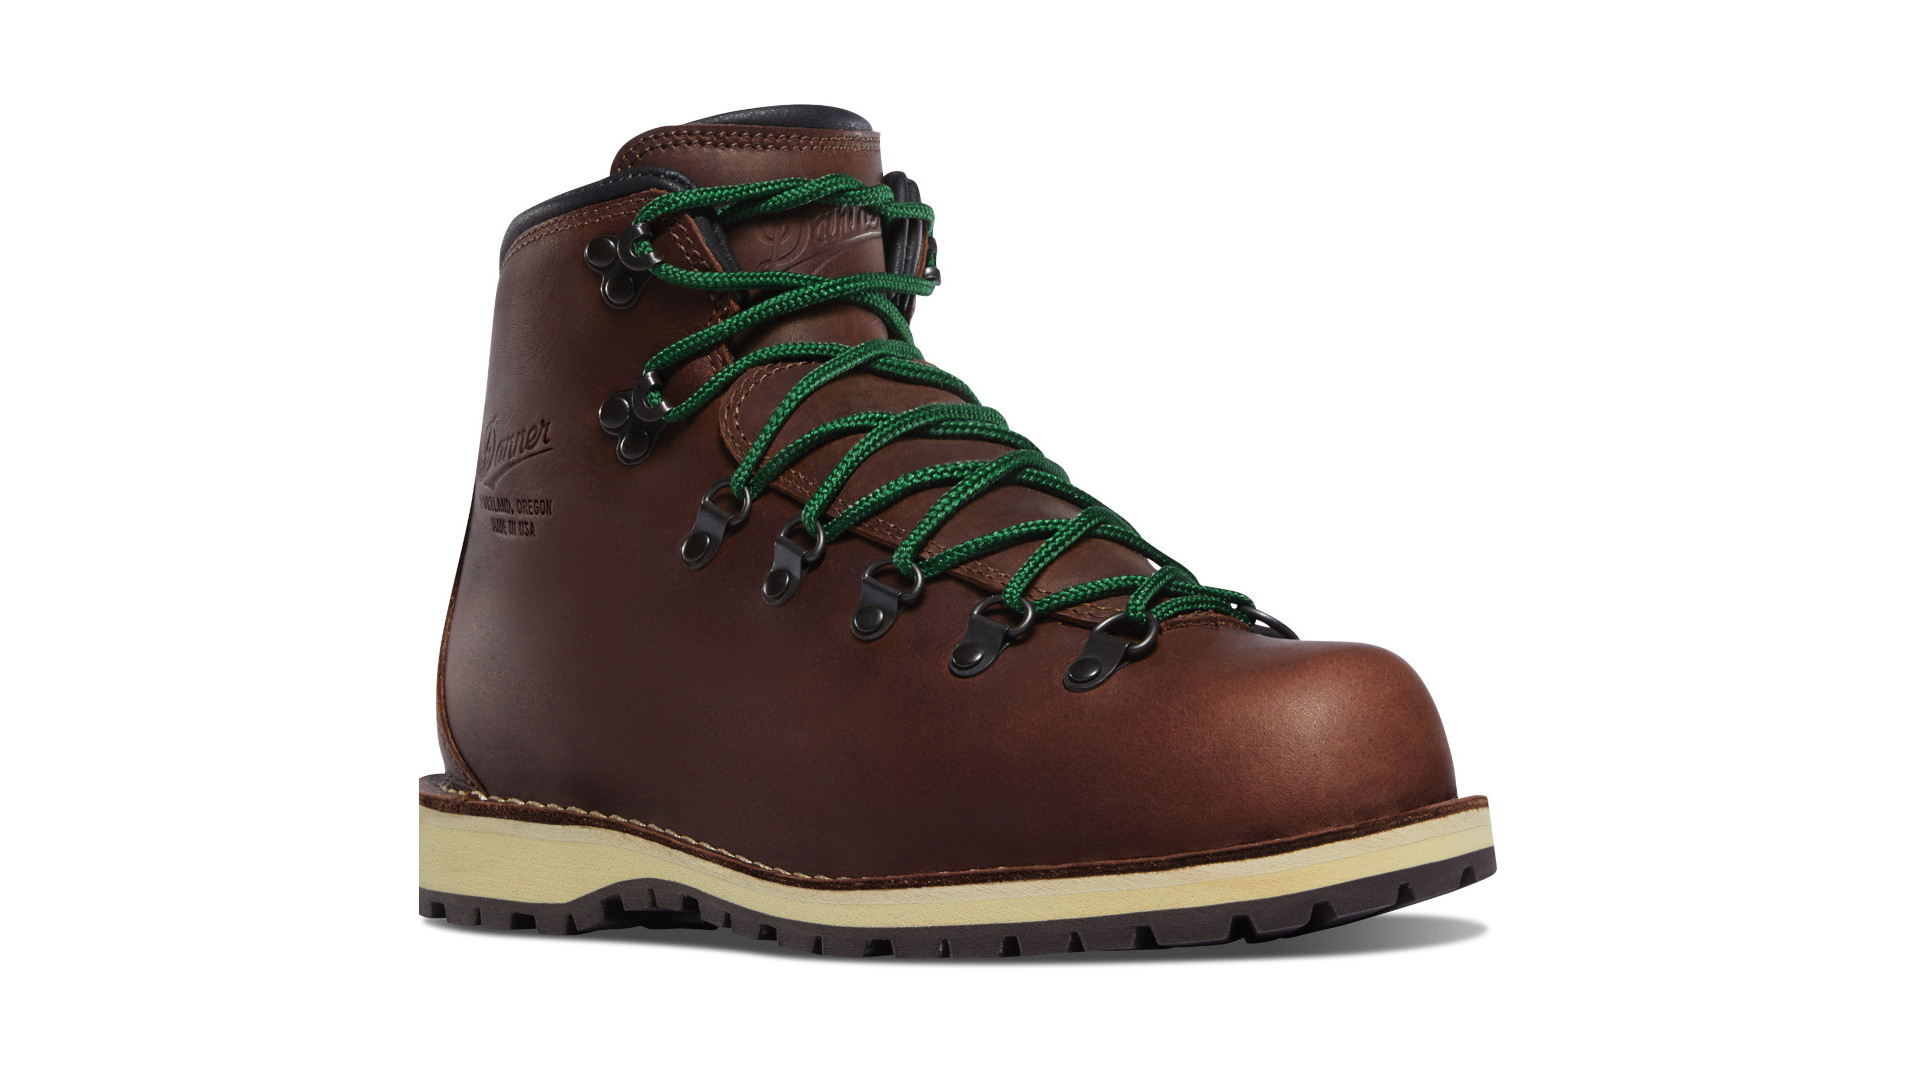 Danner Mountain Pass hiking boots review: a beautiful boot for ...